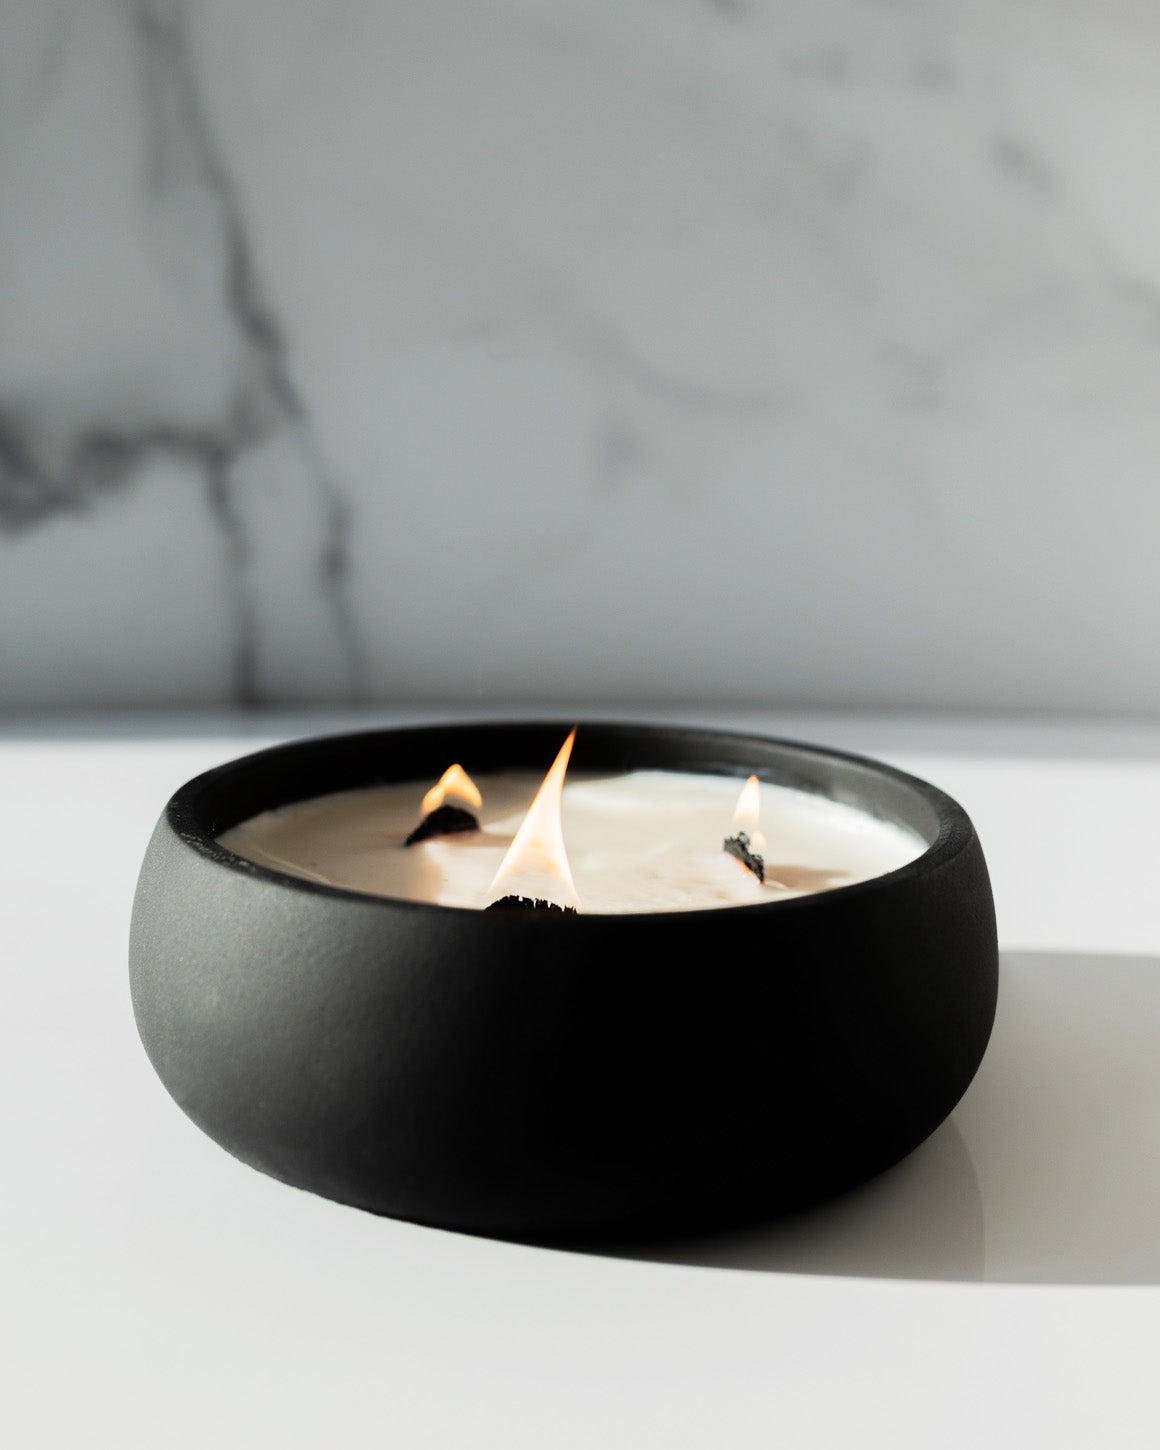 But First Sleep Coconut Soy Candle - Black Concrete Wooden Wick Vessel